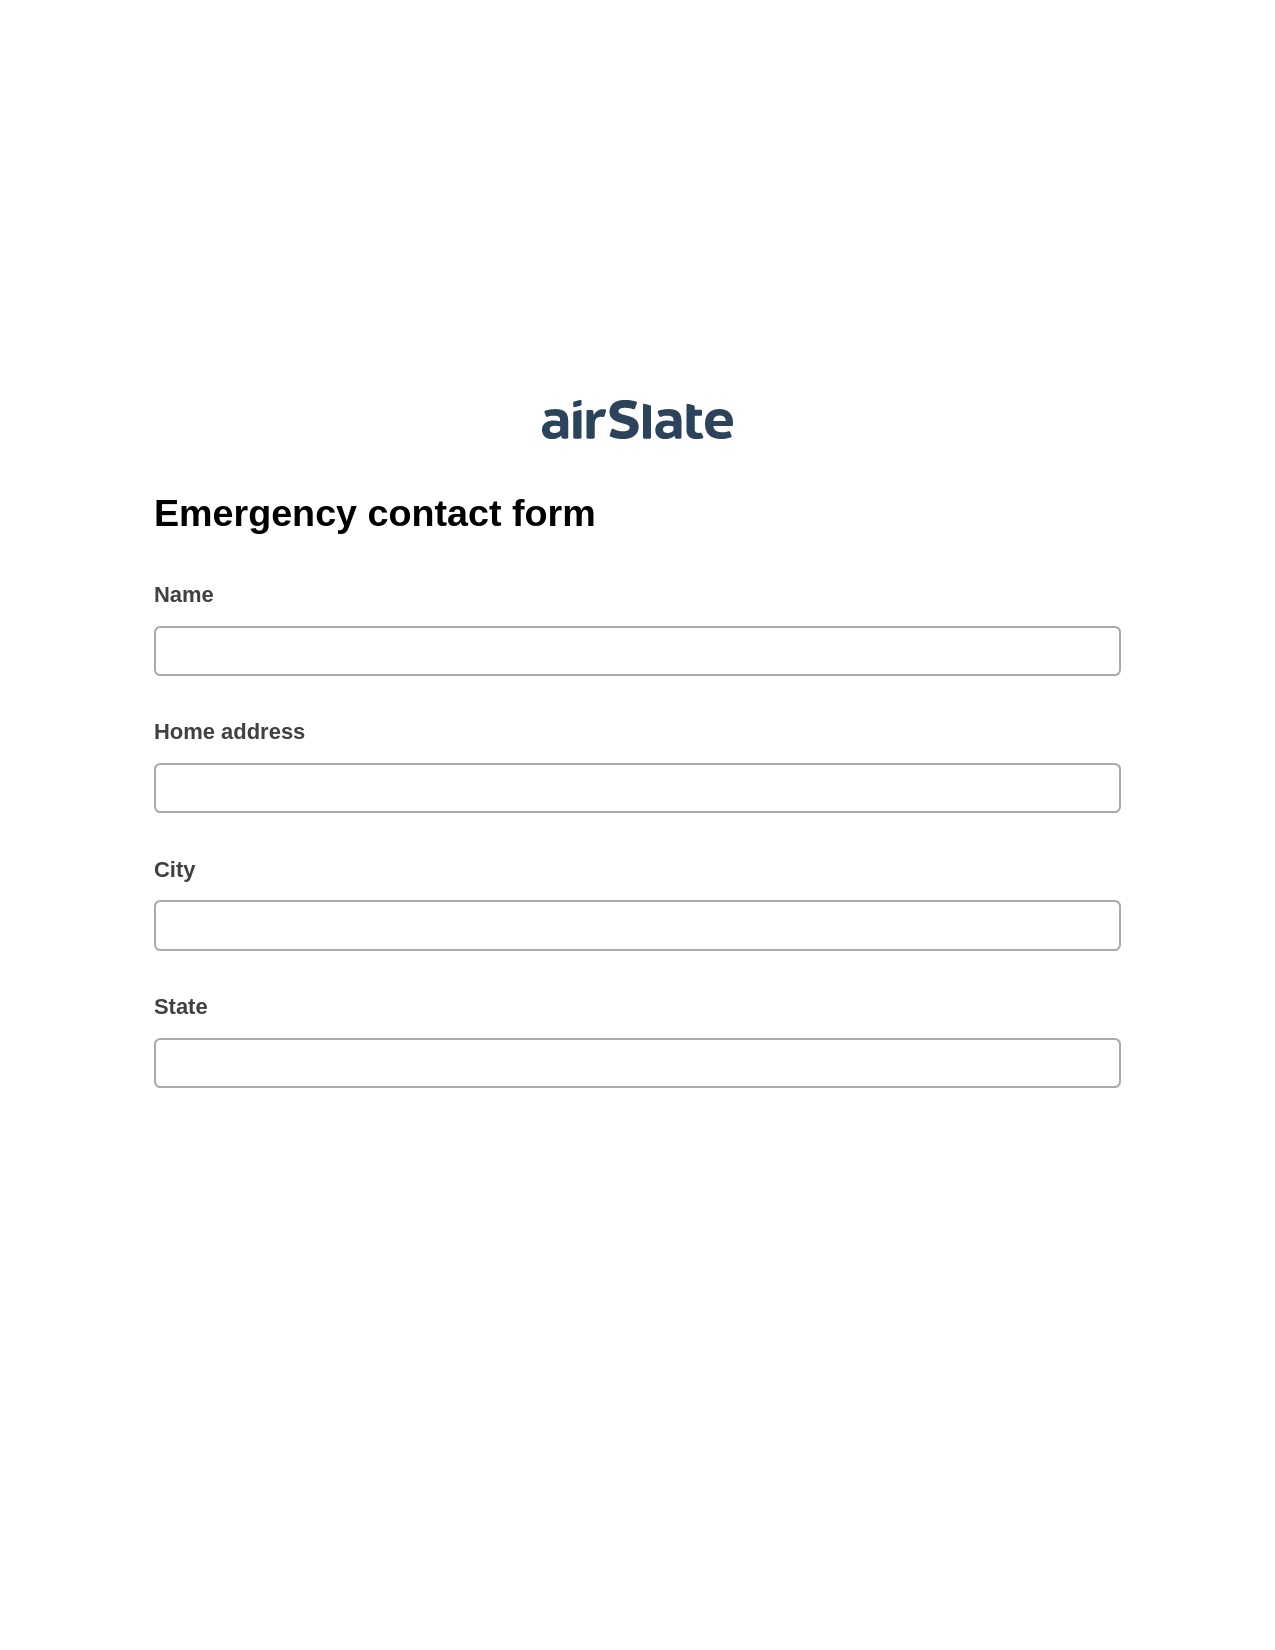 Emergency contact form Pre-fill Slate from MS Dynamics 365 Records Bot, Create slate addon, Post-finish Document Bot